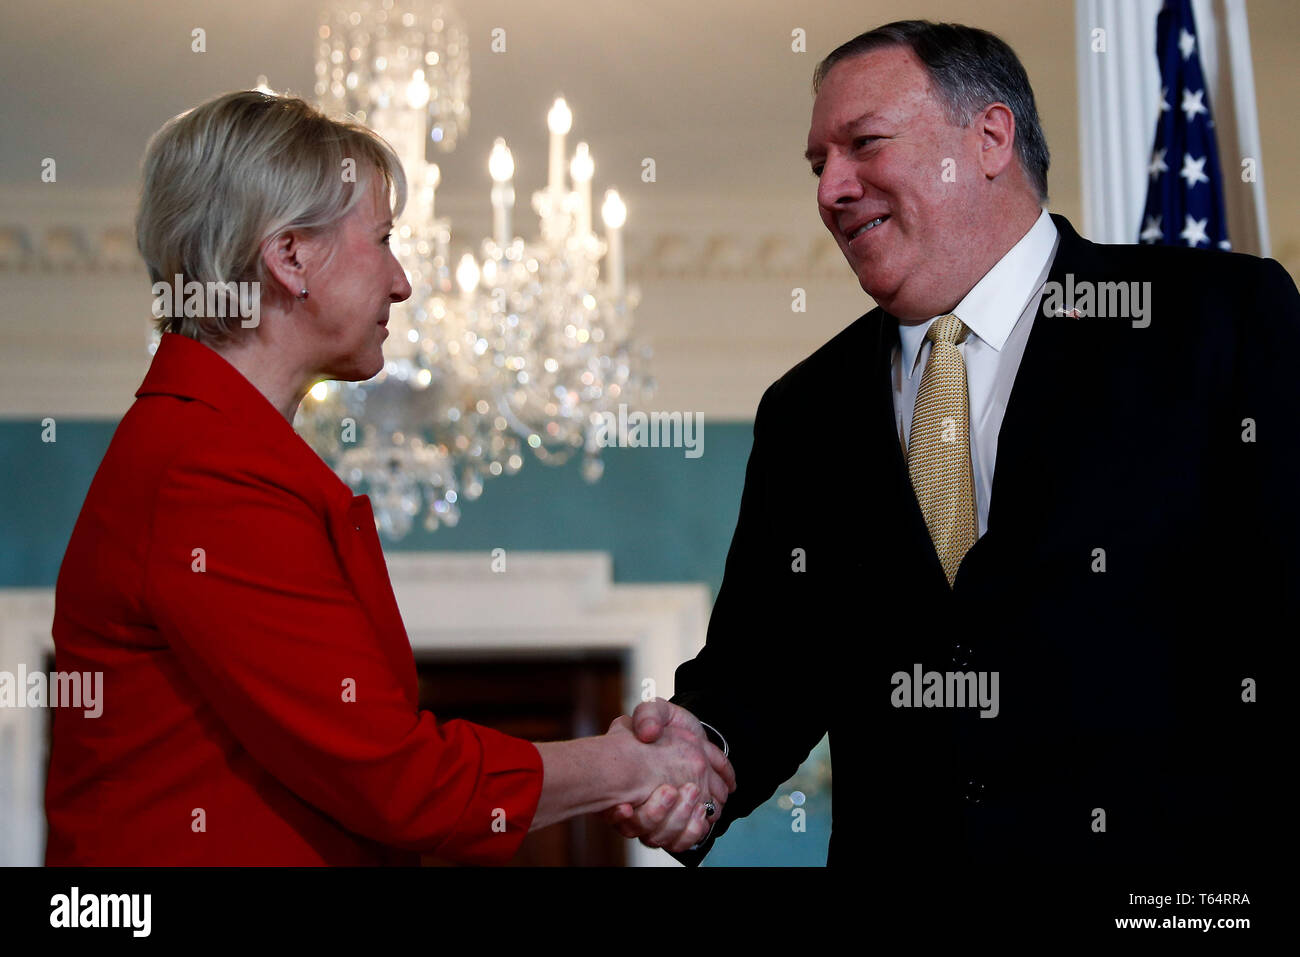 Washington, USA. 29th Apr, 2019. U.S. Secretary of State Mike Pompeo (R) meets with Swedish Foreign Minister Margot Wallstrom at the Department of State in Washington, DC, the United States, on April 29, 2019. Credit: Ting Shen/Xinhua/Alamy Live News Stock Photo